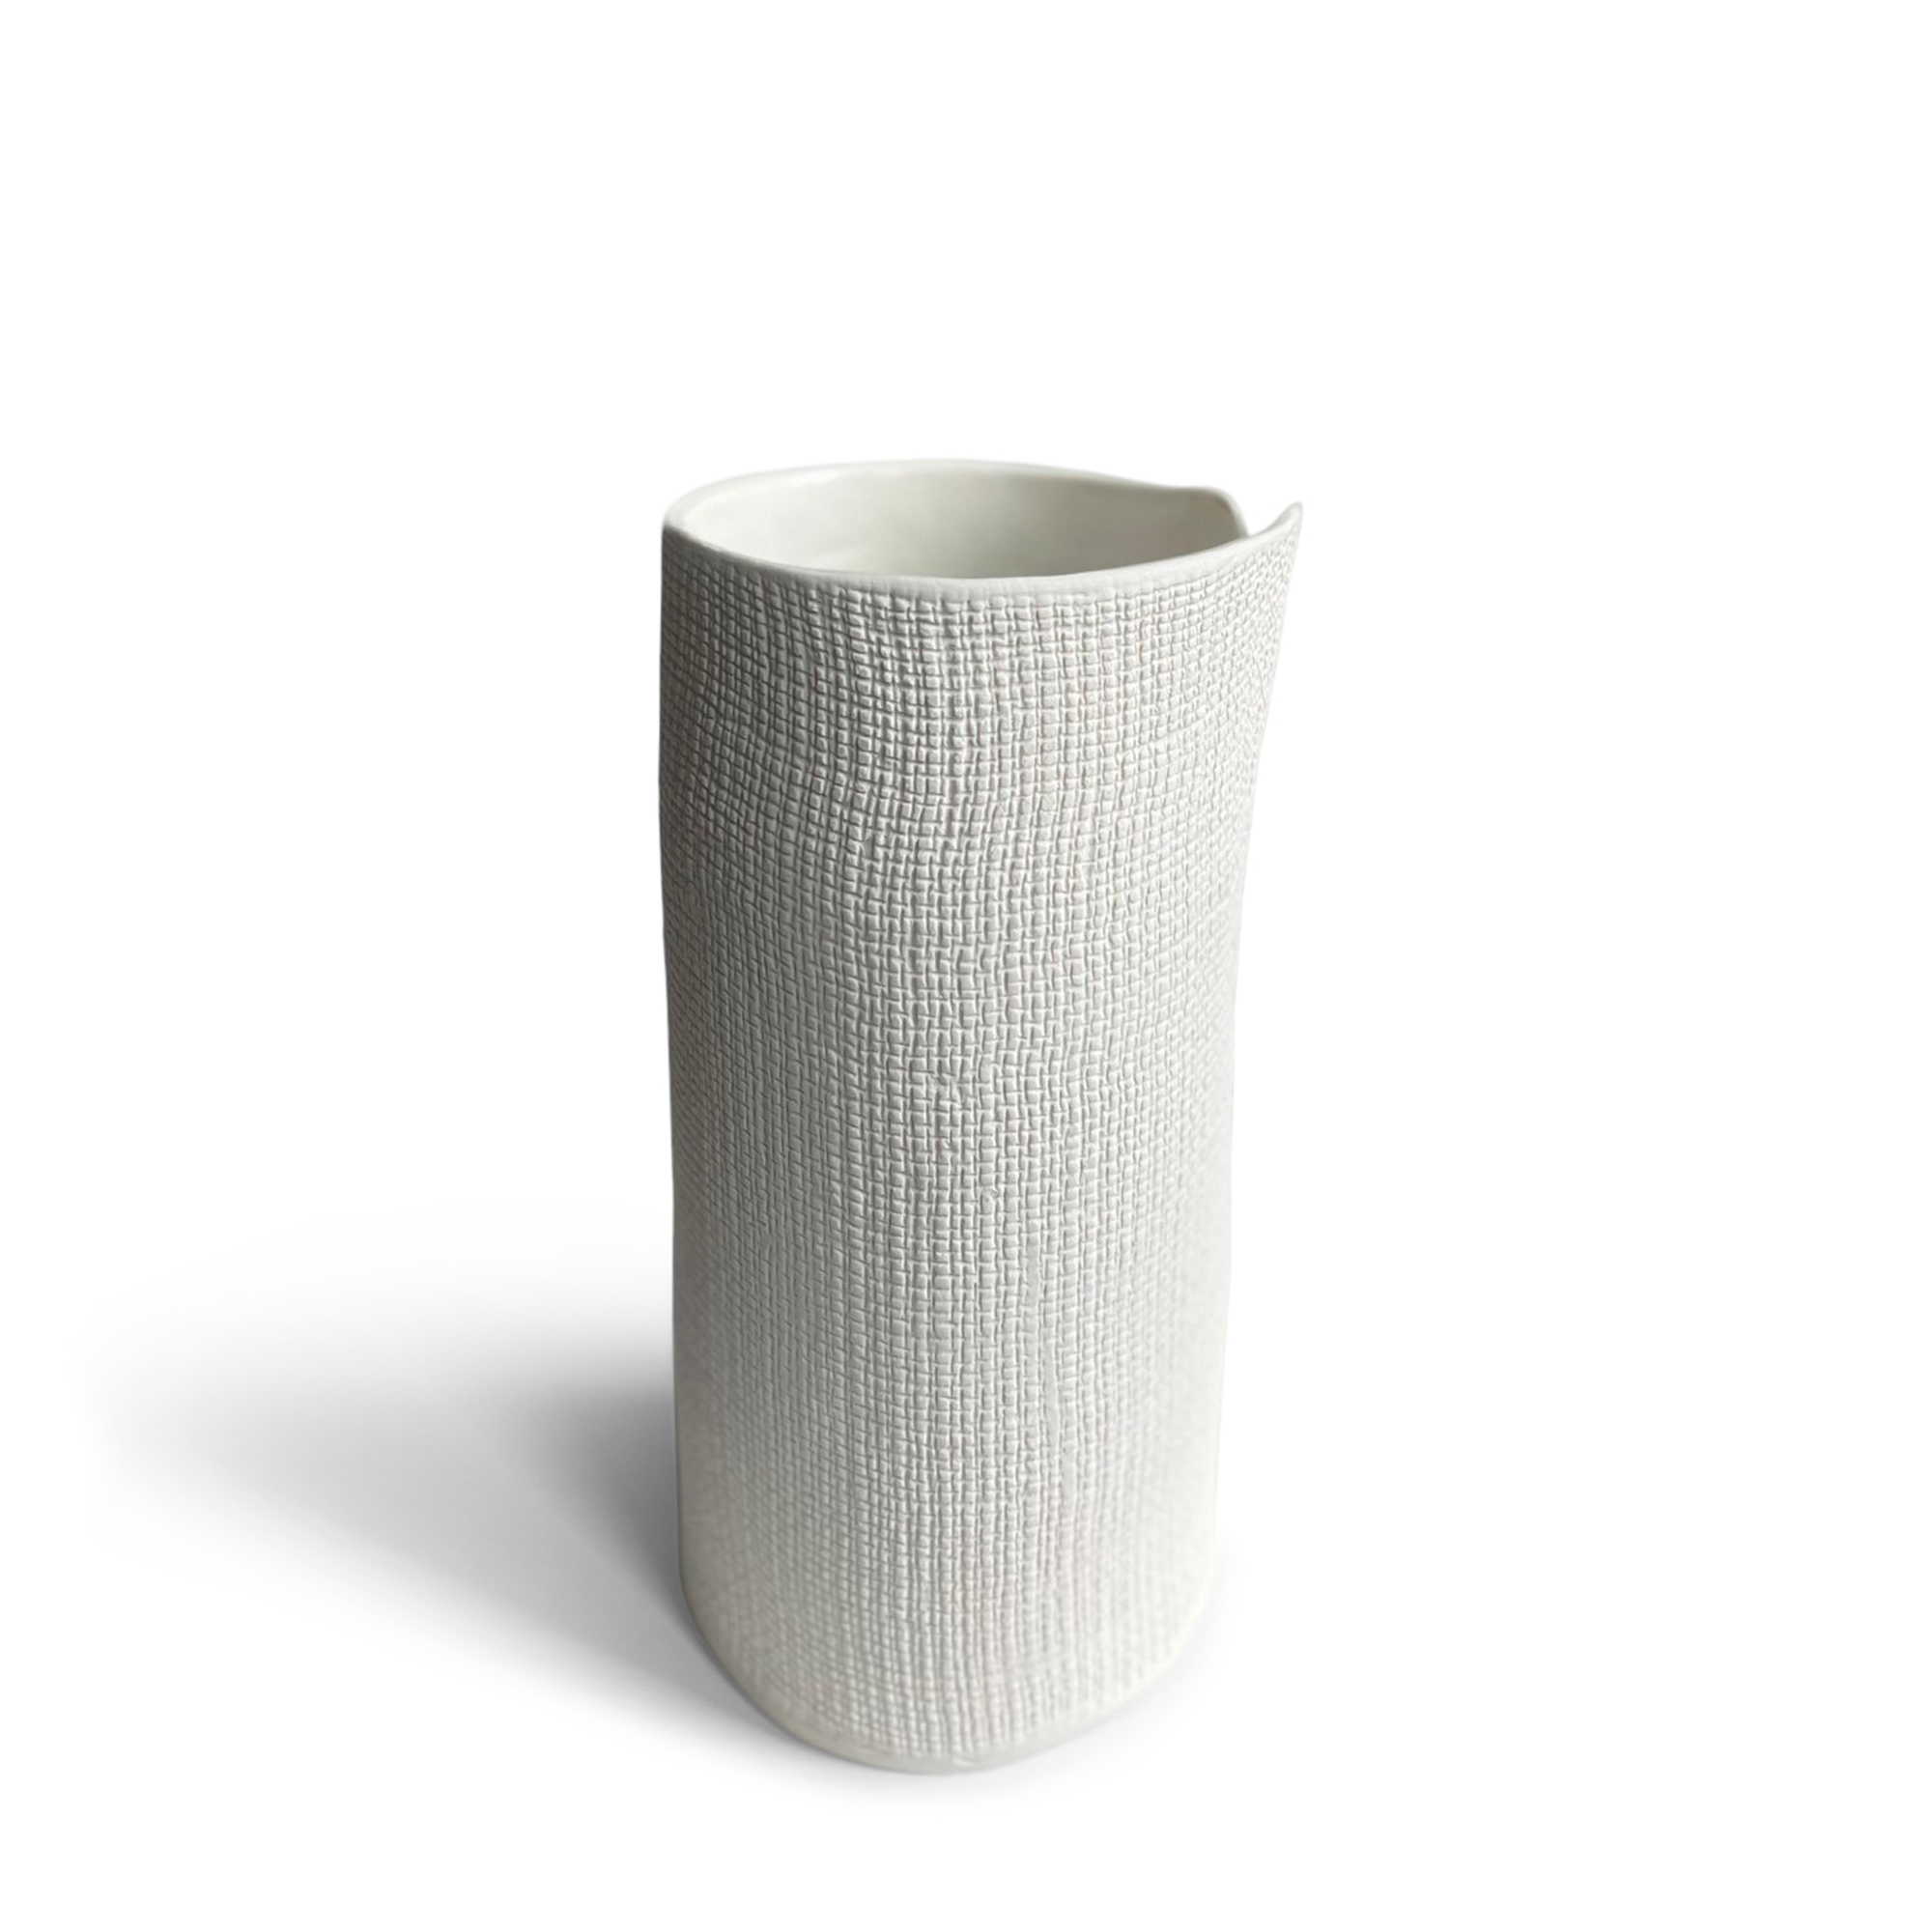 A textured white vase featuring a unique, cylindrical shape. The vase have a woven-like surface pattern that adds visual interest and a tactile feel. Its modern, sculptural design makes it perfect for minimalist or contemporary decor.